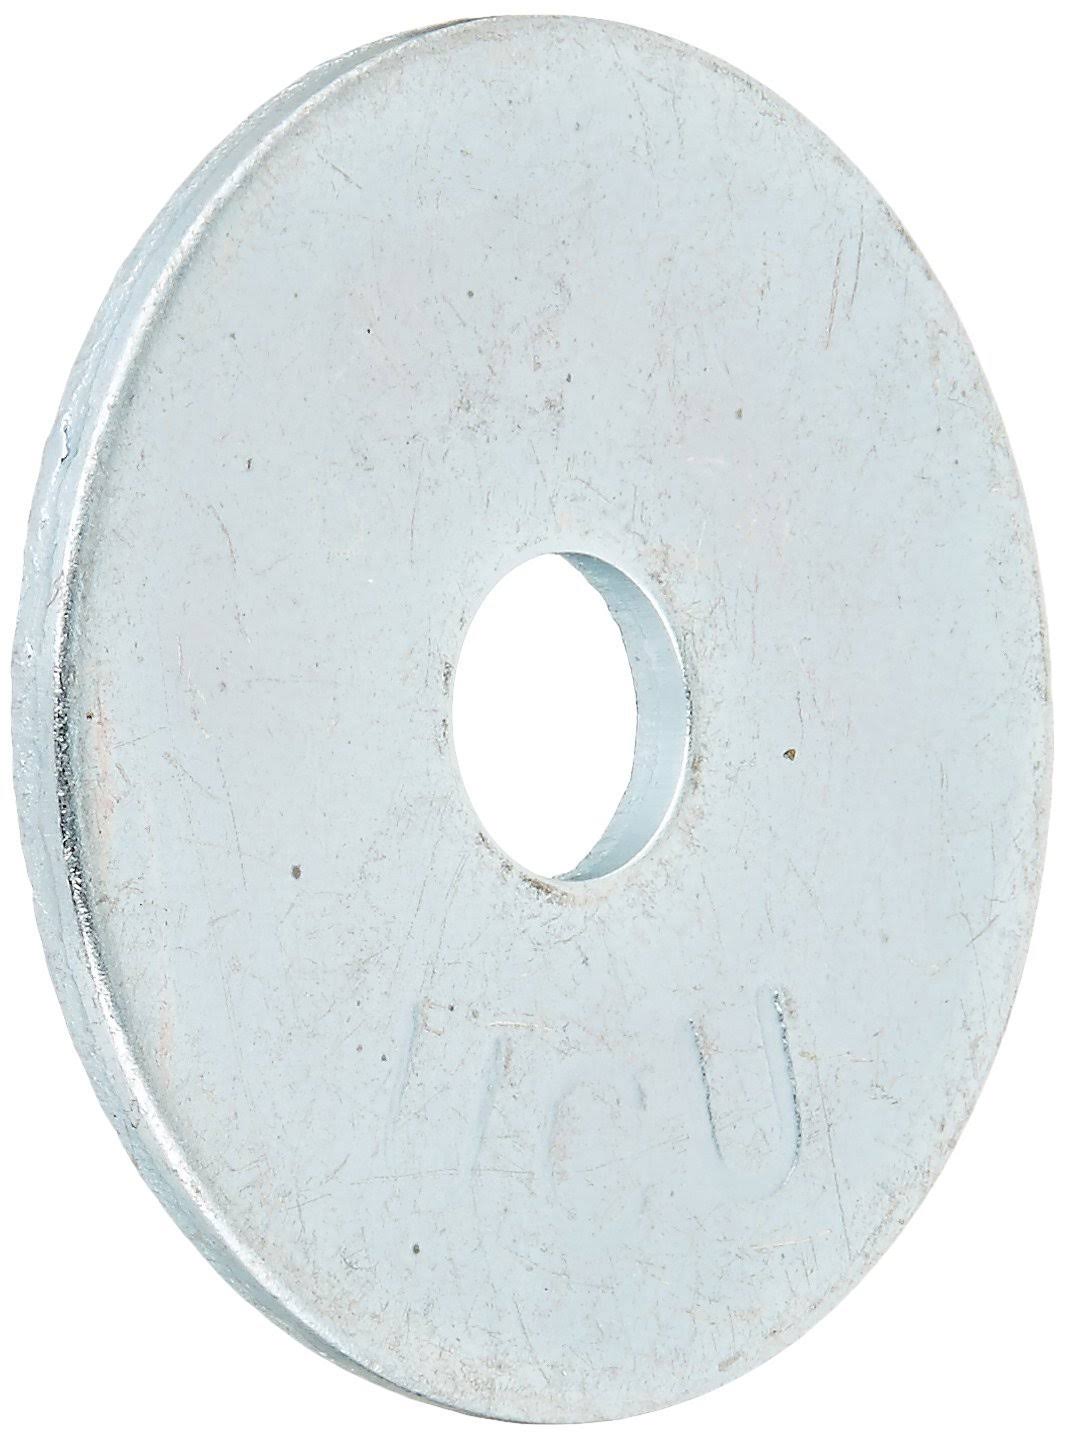 The Hillman Group Fender Zinc Washers - 3/16in x 1in, 100pcs